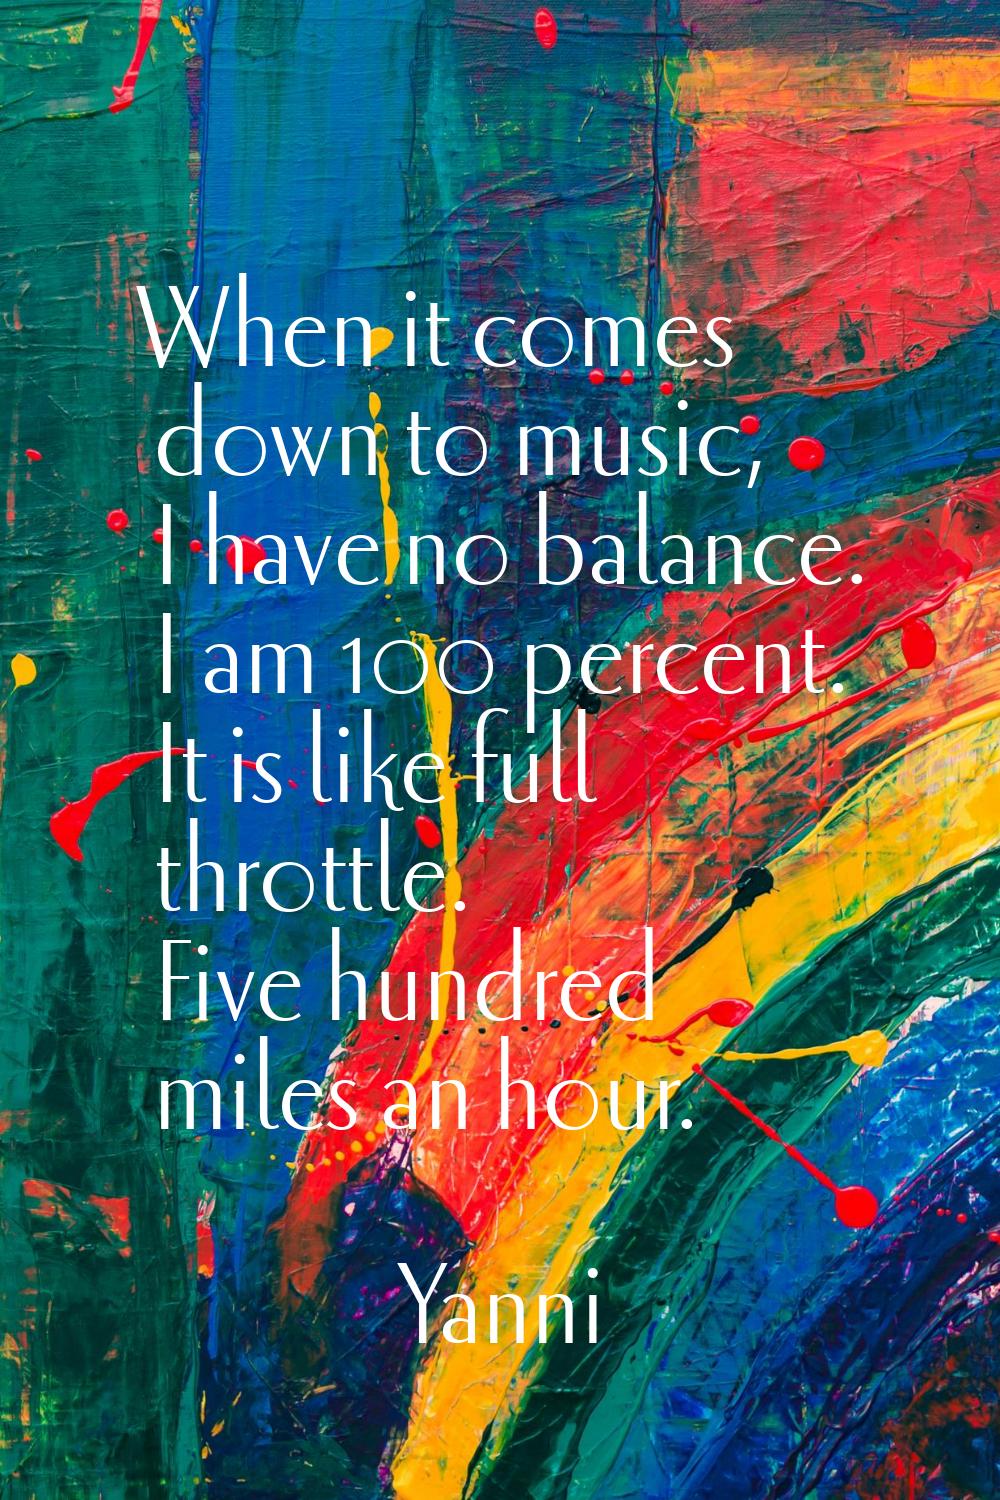 When it comes down to music, I have no balance. I am 100 percent. It is like full throttle. Five hu